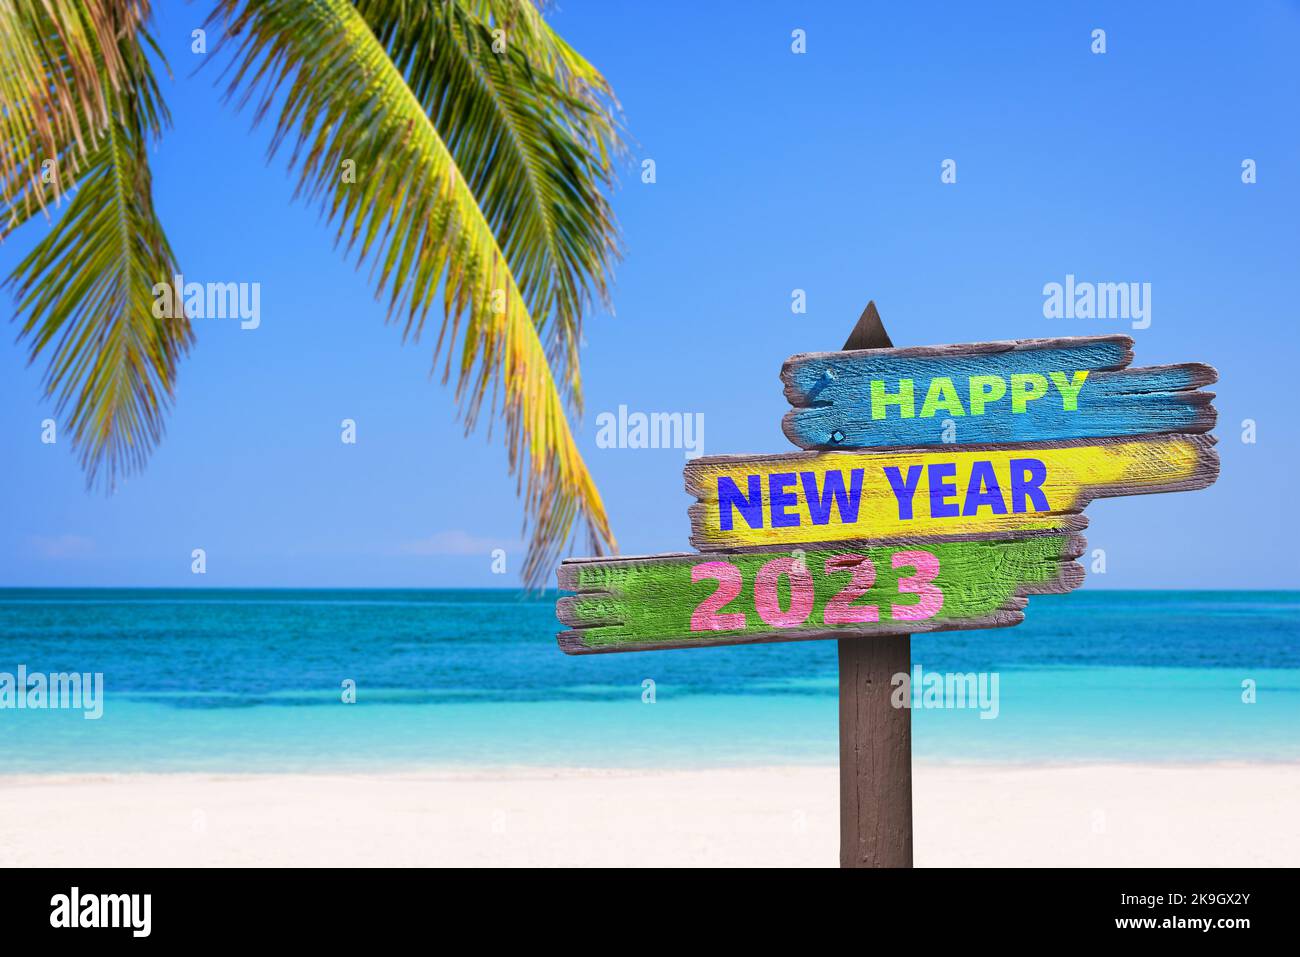 Hapy new year 2023 written on direction signs, tropical beach background, travel and tourism greeting card Stock Photo